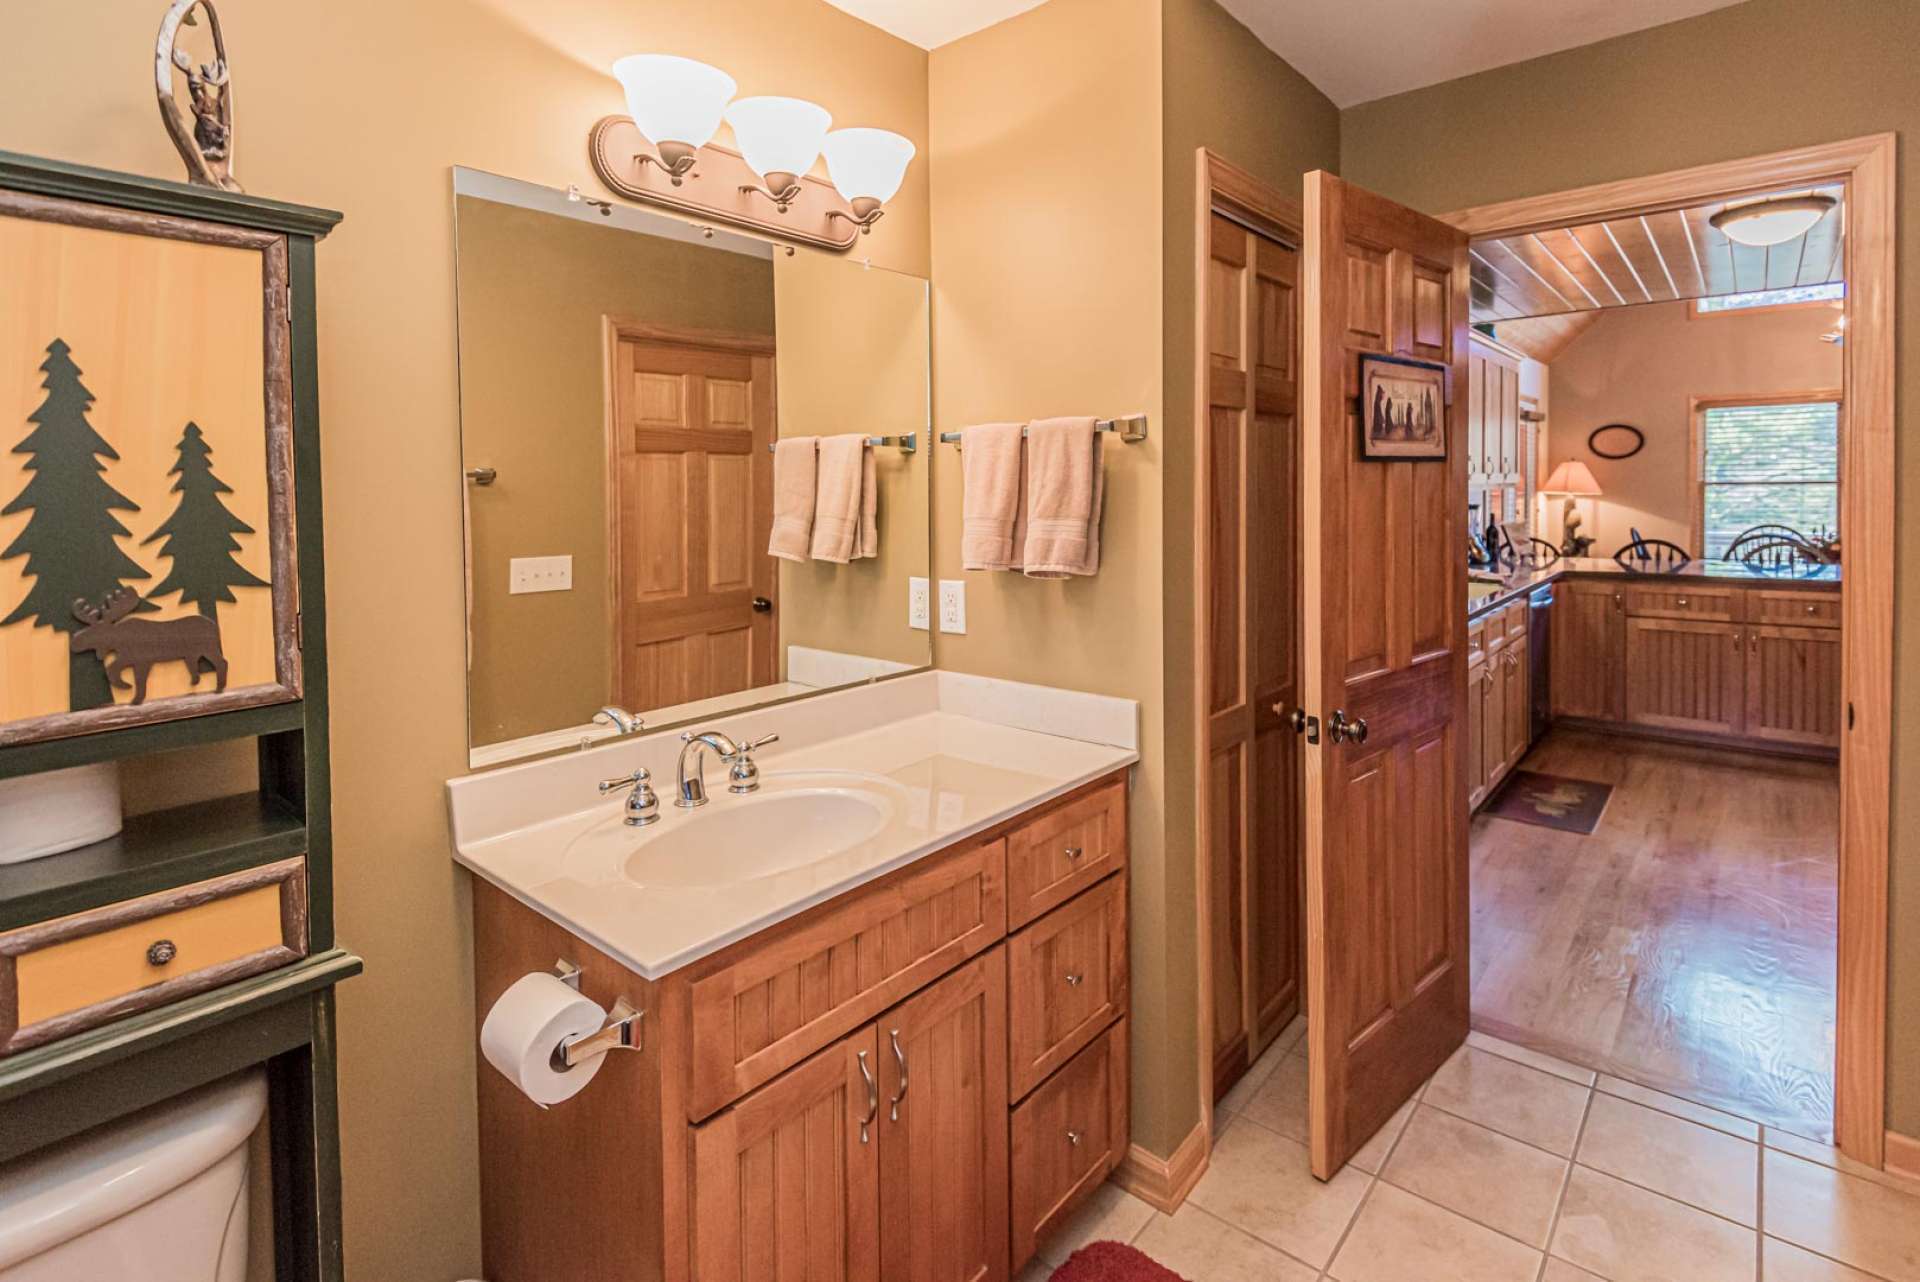 A large full bath with tiled walk-in shower completes the main level.